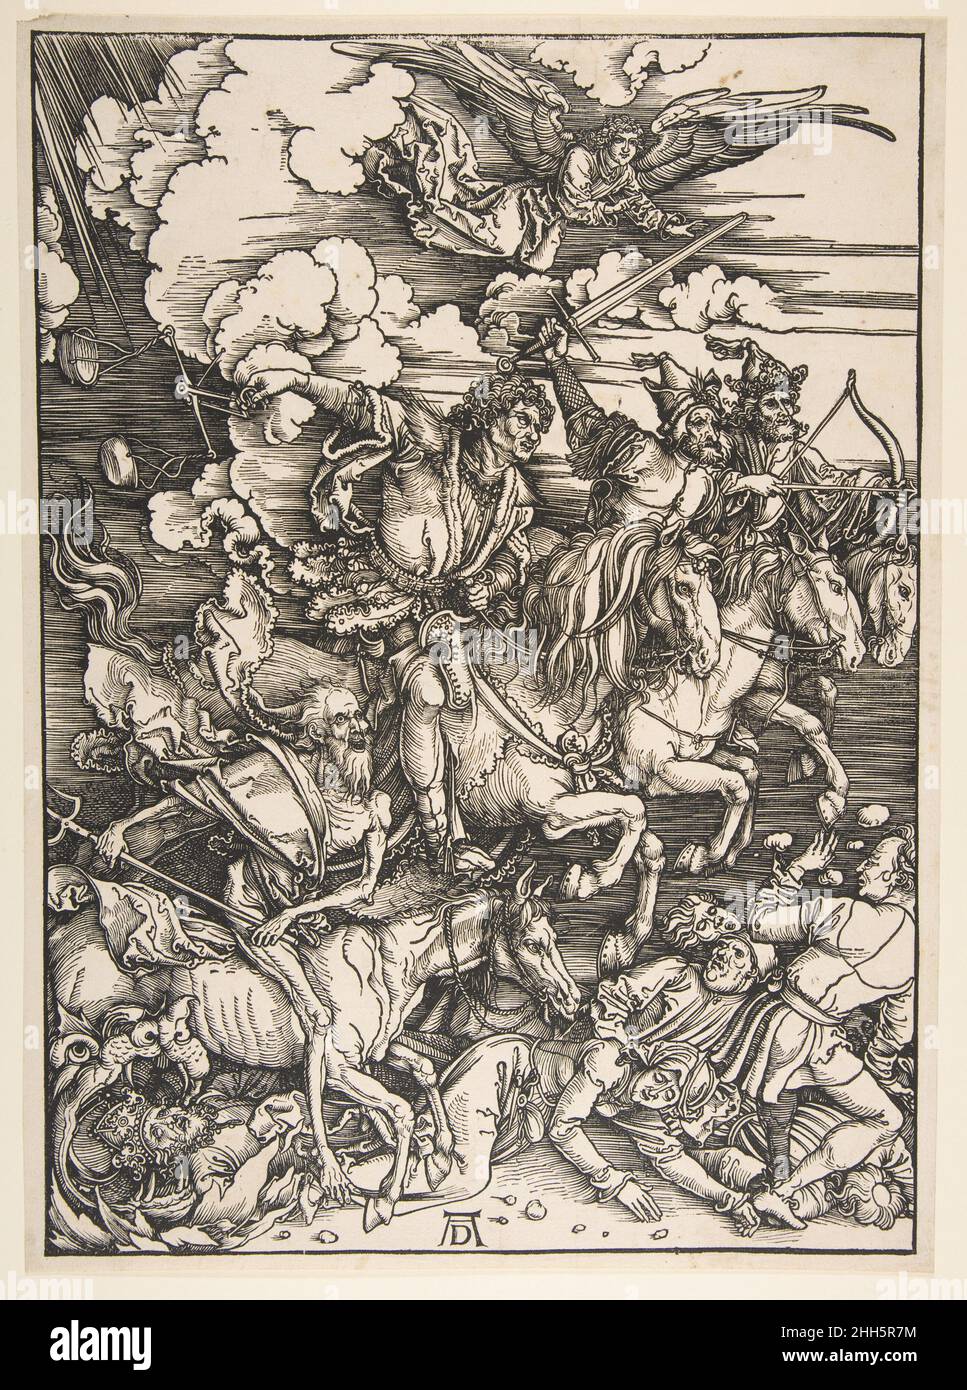 Four Horsemen of the Apocalypse ca. 1497/1498 Albrecht Dürer German The third woodcut from Dürer’s Apocalypse, the Four Horsemen presents a dramatically distilled version of the passage from the book of Revelation (6:1–8). Transforming what was a relatively staid and unthreatening image in earlier illustrated Bibles, Dürer injects motion and danger into this climactic moment through his subtle manipulation of the wood block. The parallel lines across the image establish a basic middle tone, against which the artist silhouettes and overlaps the powerful forms of the four horses and riders—from Stock Photo